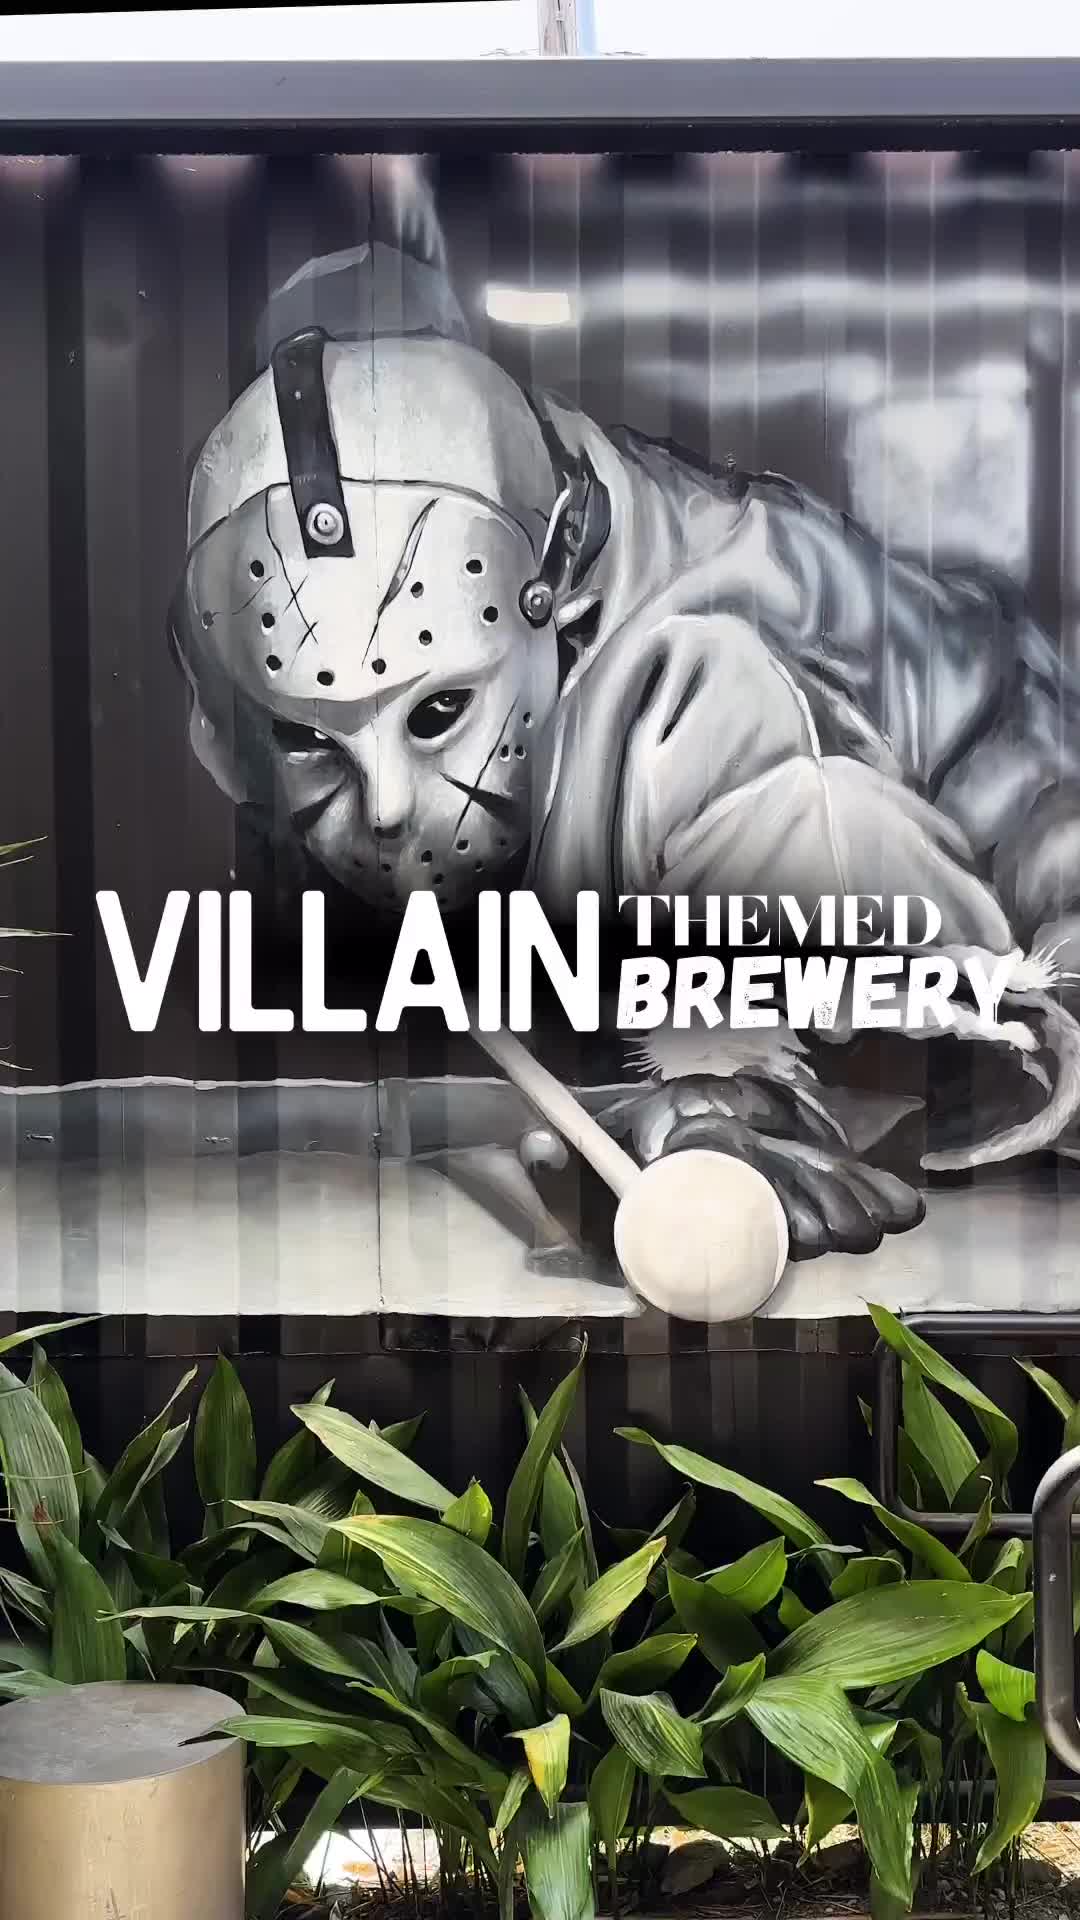 Must-See Villain-Themed Brewery in Anaheim